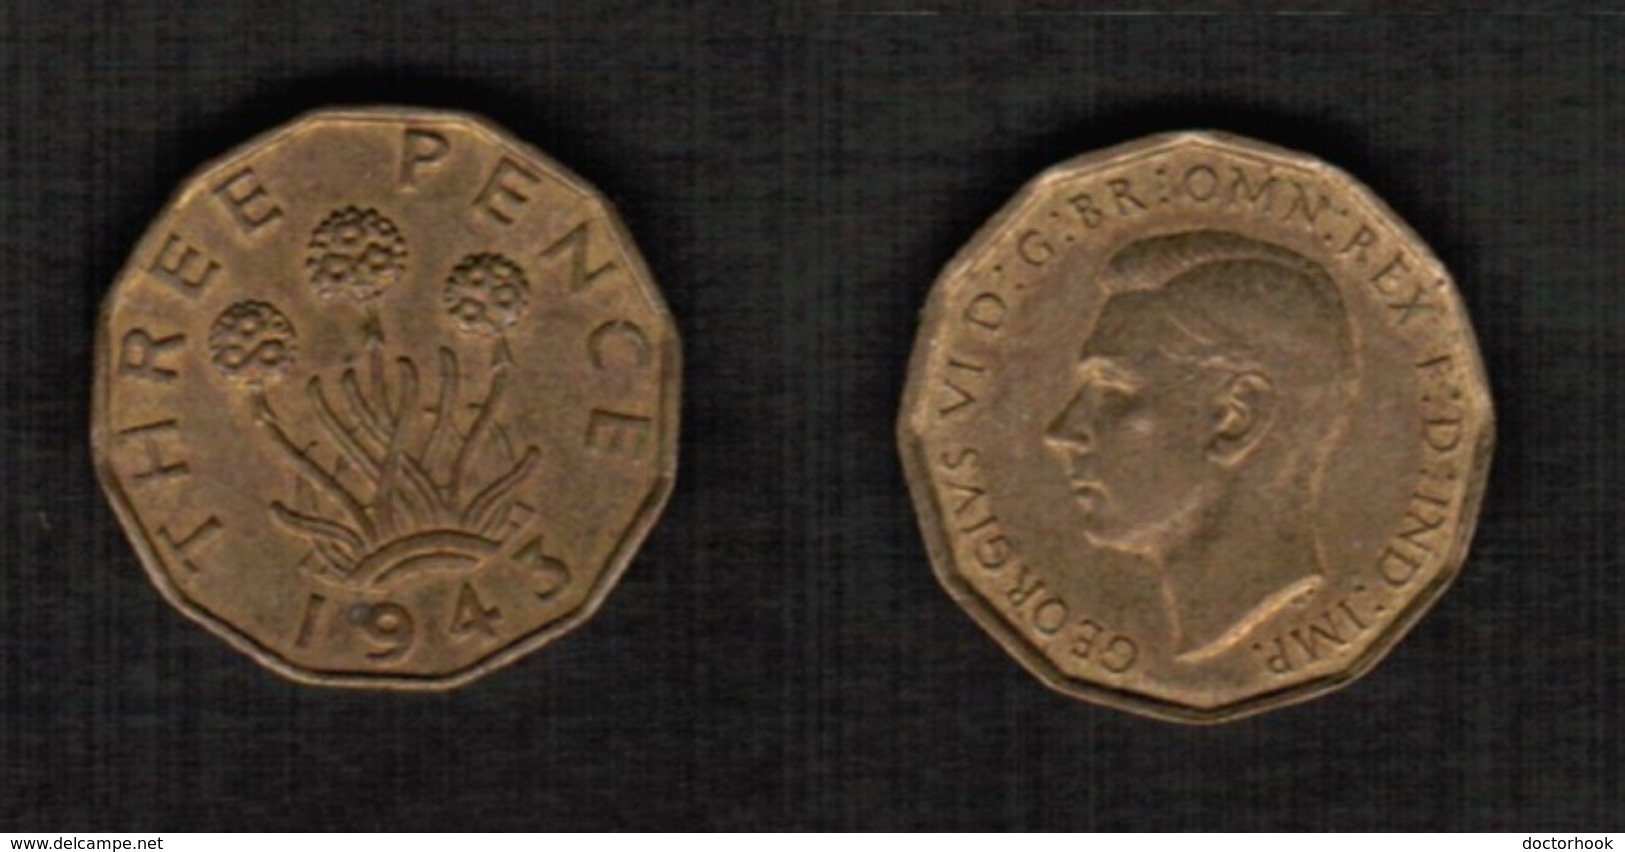 GREAT BRITAIN  3 PENCE 1943 (KM # 849) #5559 - F. 3 Pence